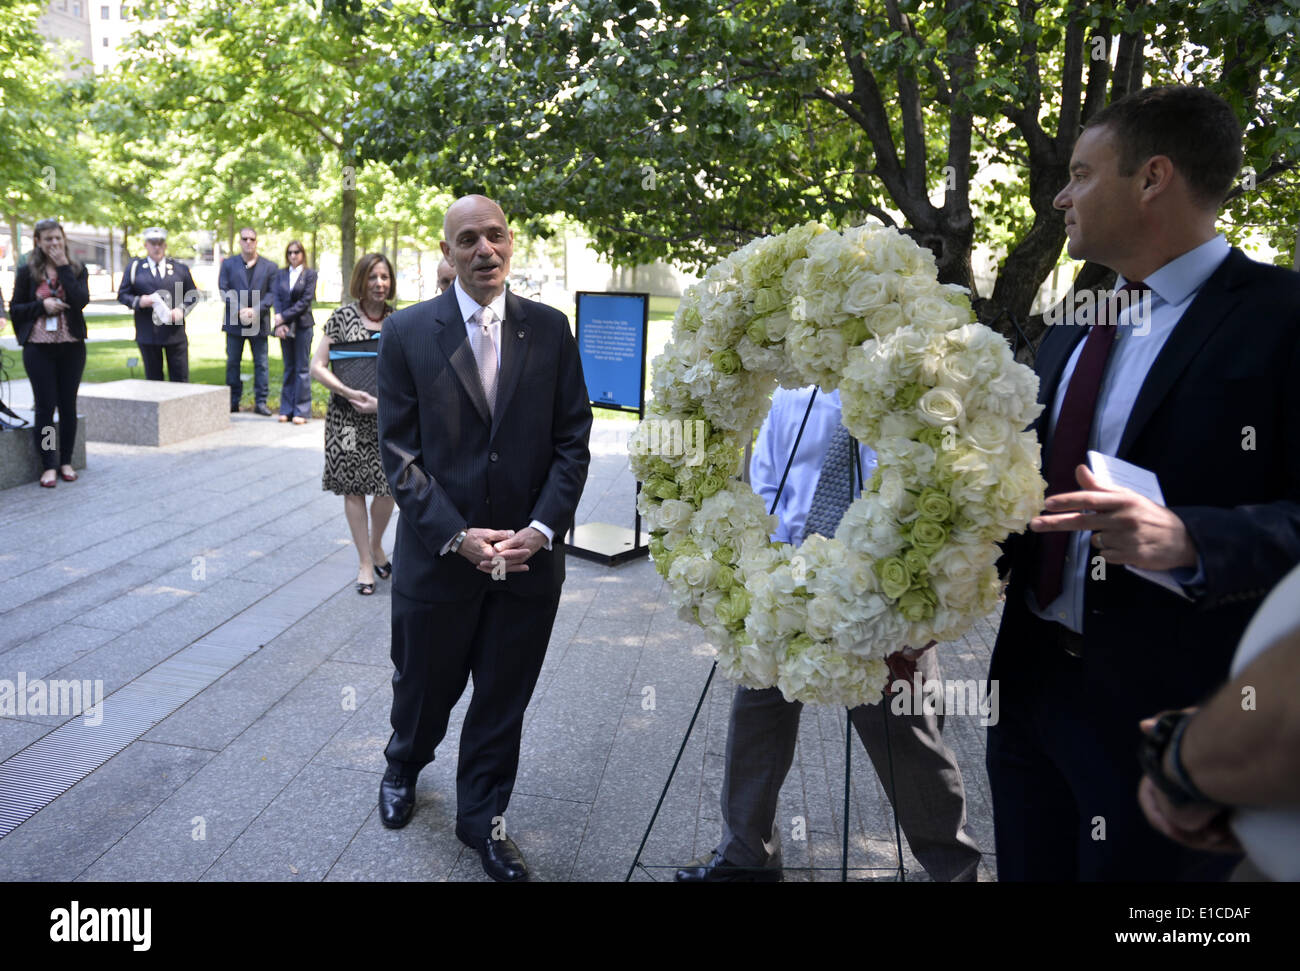 New York, USA. 30th May, 2014. Joe Daniels, president and CEO of the National 9/11 Memorial & Museum, attends the wreath laying ceremony at the Ground Zero in New York, the United States, May 30, 2014. A wreath laying ceremony was held in honor of the thousands of rescue and recovery workers to mark the 12th anniversary of the official end of the rescue and recovery effort. On May 30, 2002, the Last Column was the final piece of steel to be removed from Ground Zero. Credit:  Wang Lei/Xinhua/Alamy Live News Stock Photo